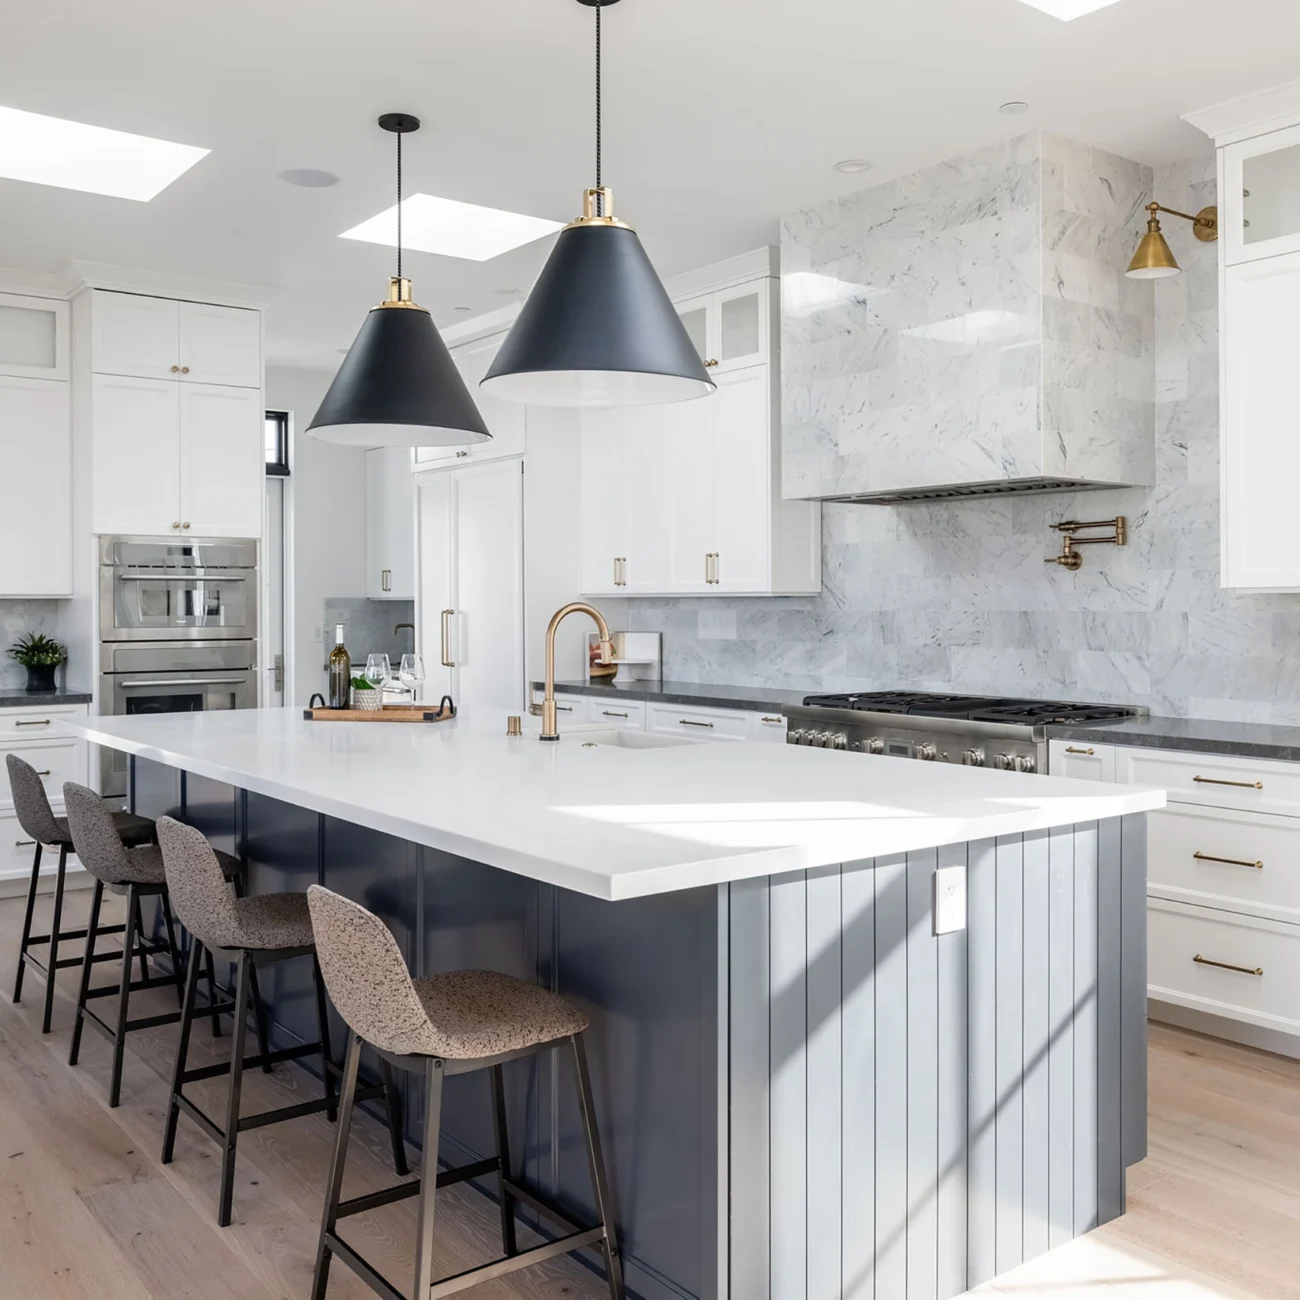 Christine Vroom Interiors | 36th | Kitchen with black accents